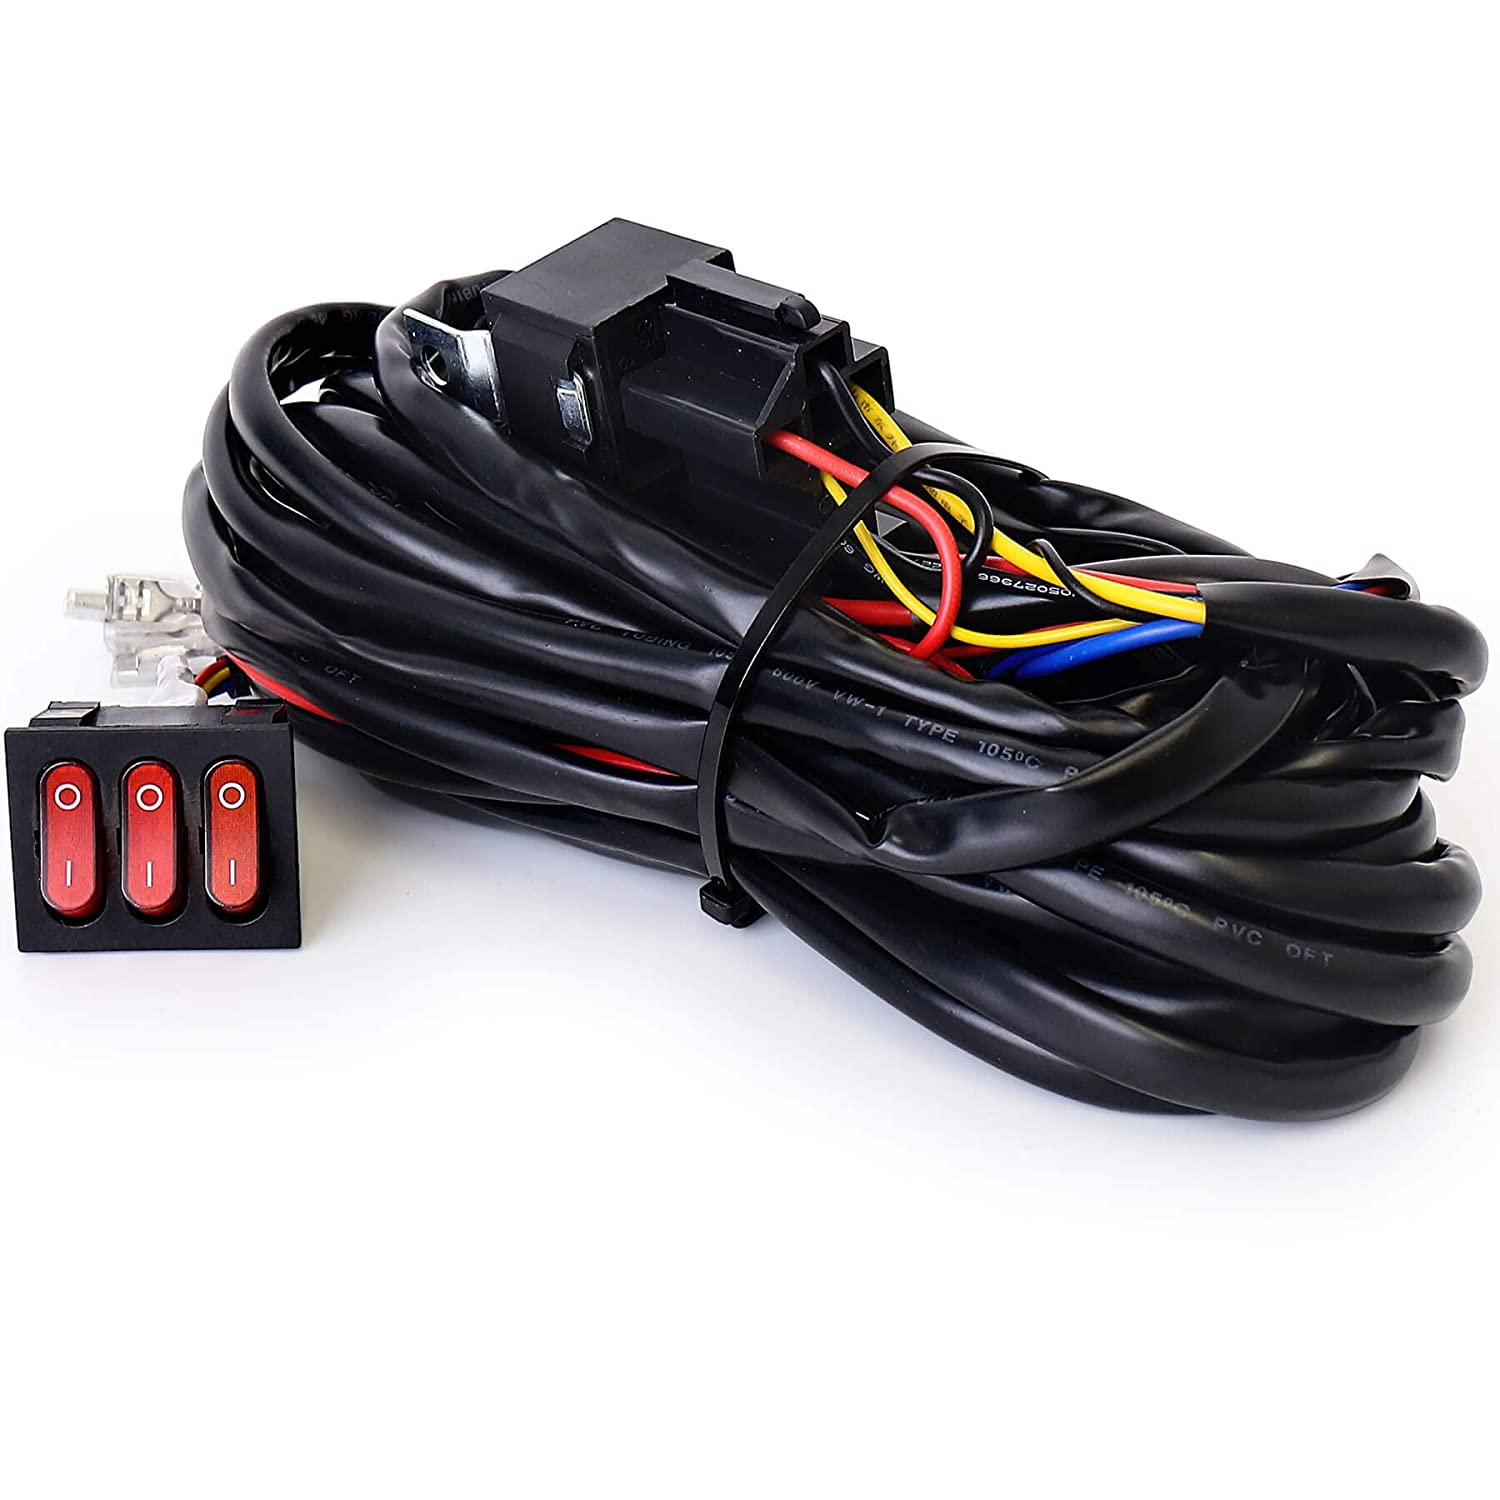 2 Leads Wiring Harness Kit with 3 On Off Switches, 12V 4 Wires LED Side Shooter Pods Wiring Harness for Off Road Heavy Duty Truck ATV SUV LED Lights LED Work Light Pods